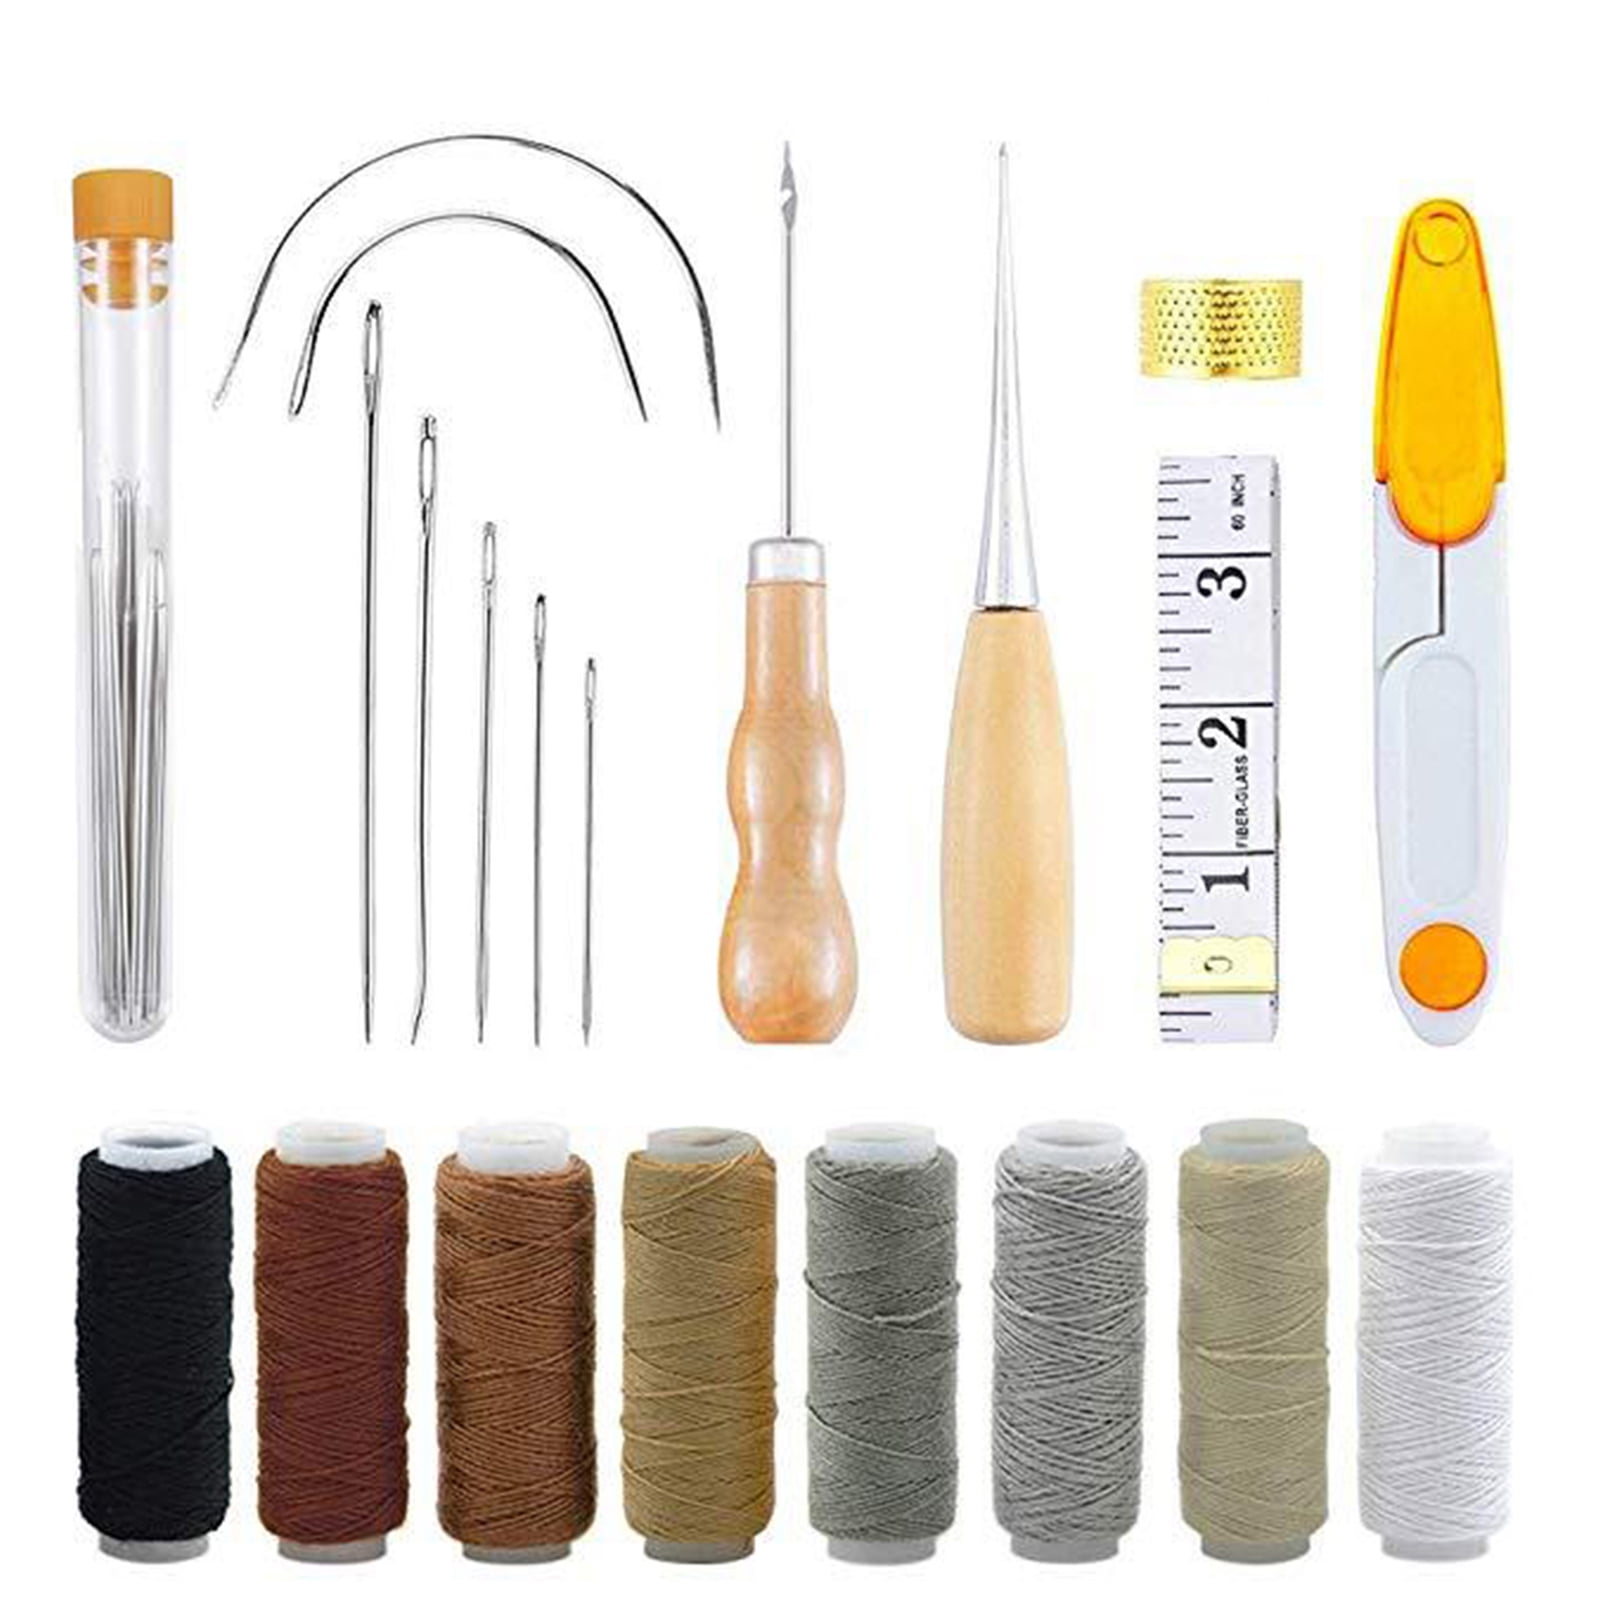 NEW Basic Home Handy Needle Assortment Leather DIY Hand Sewing Curved Triangle 